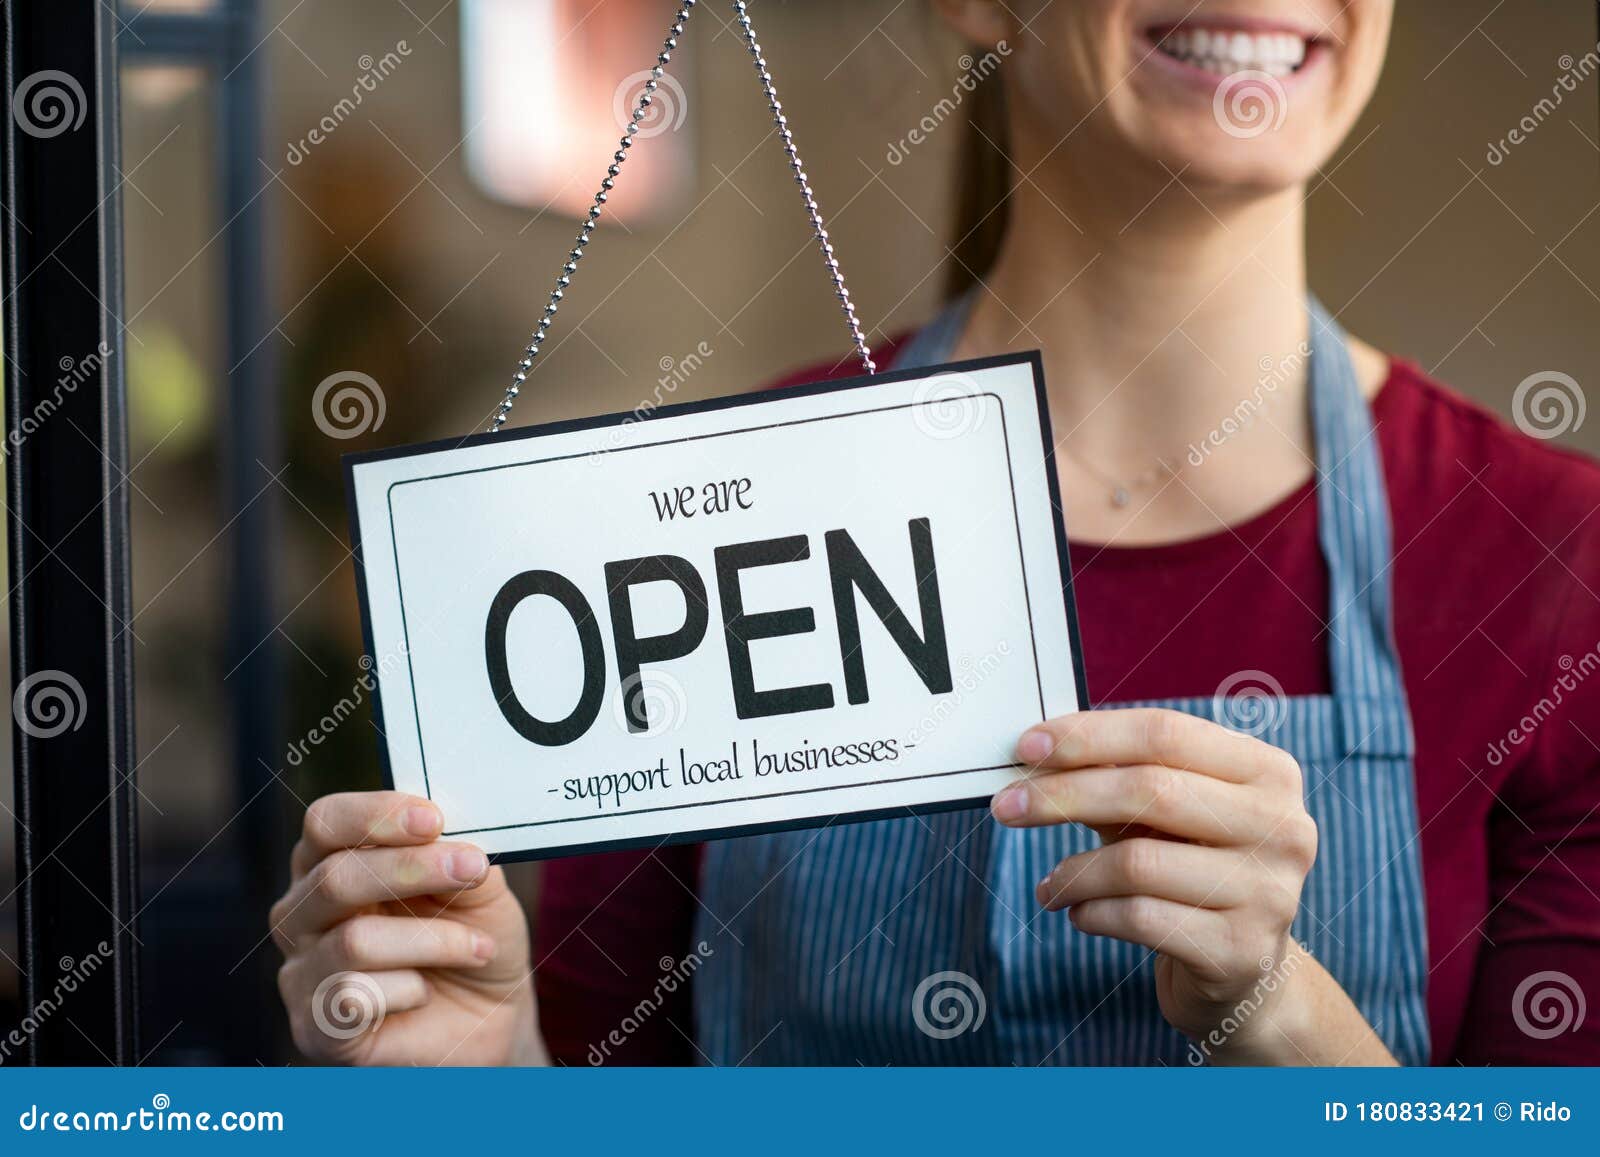 open sign in a small business shop